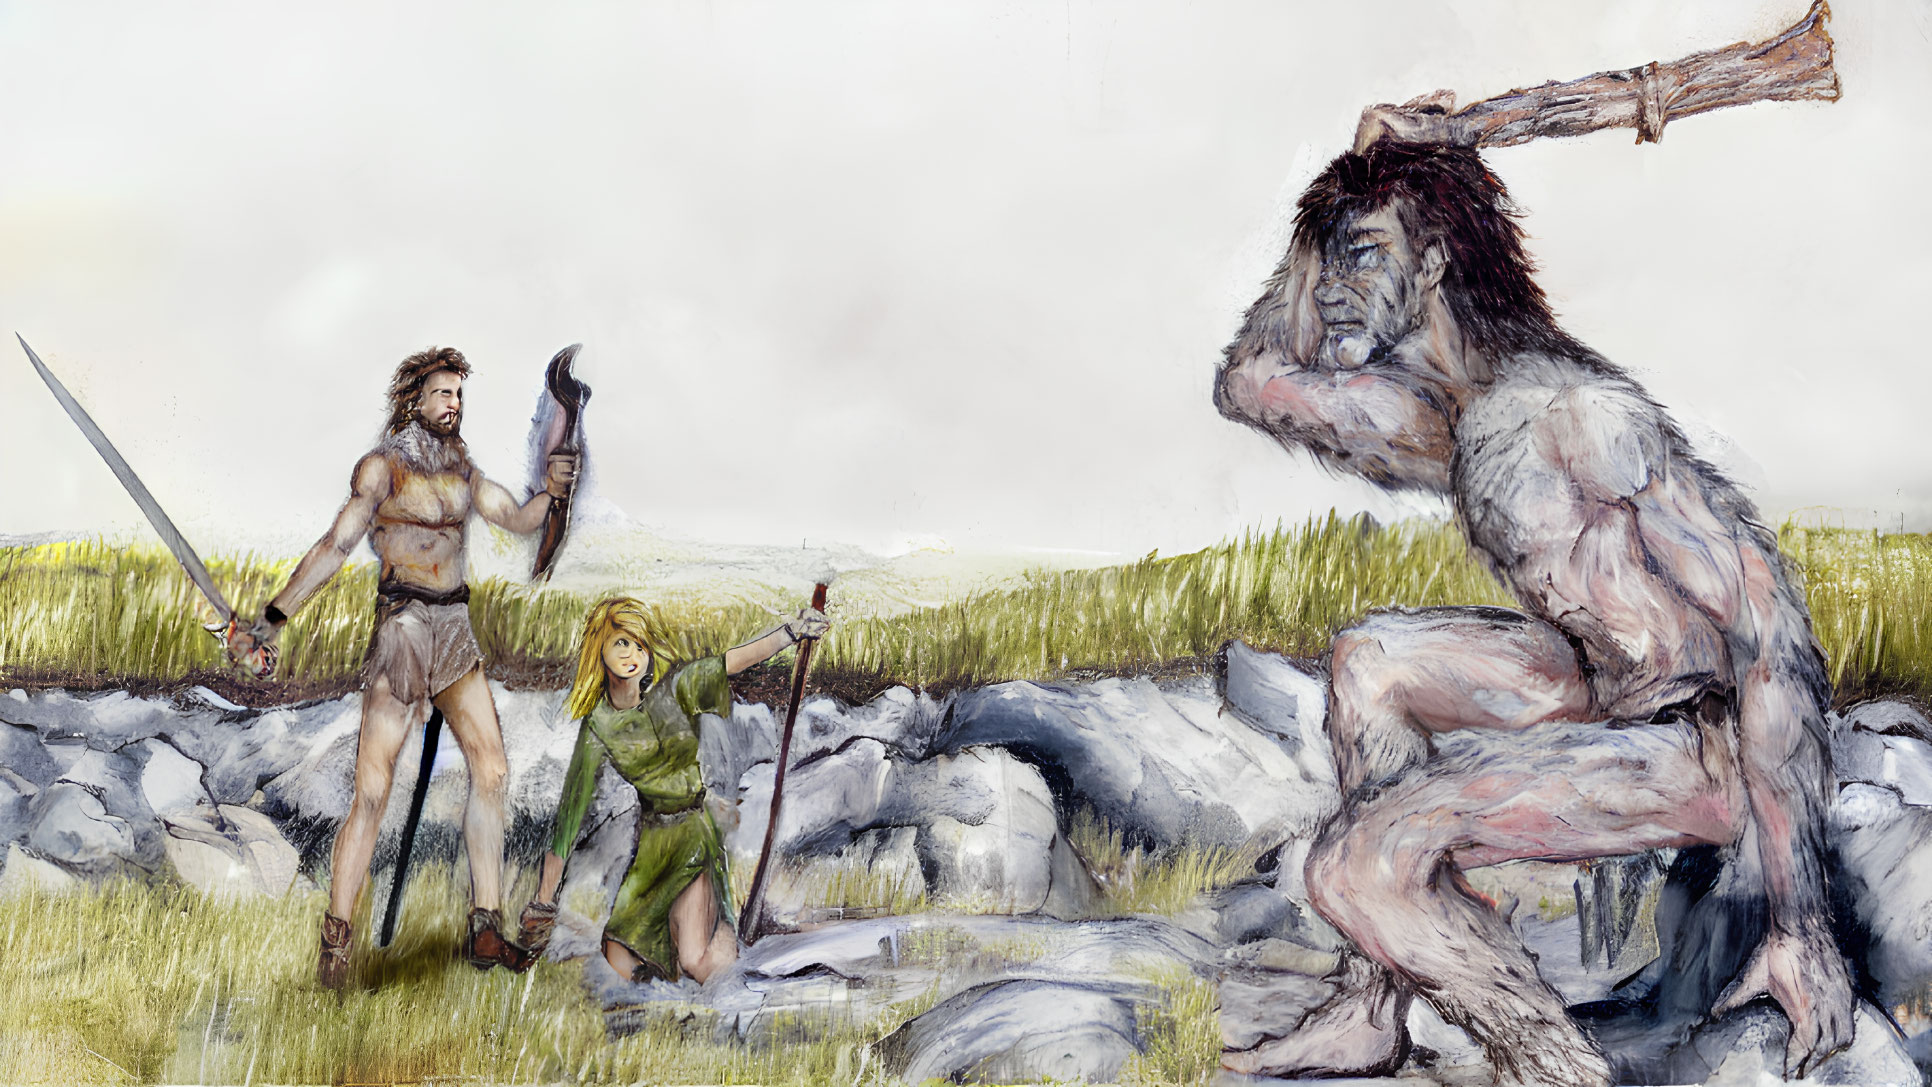 Two humans with sword and spear confront giant beast in rocky landscape.